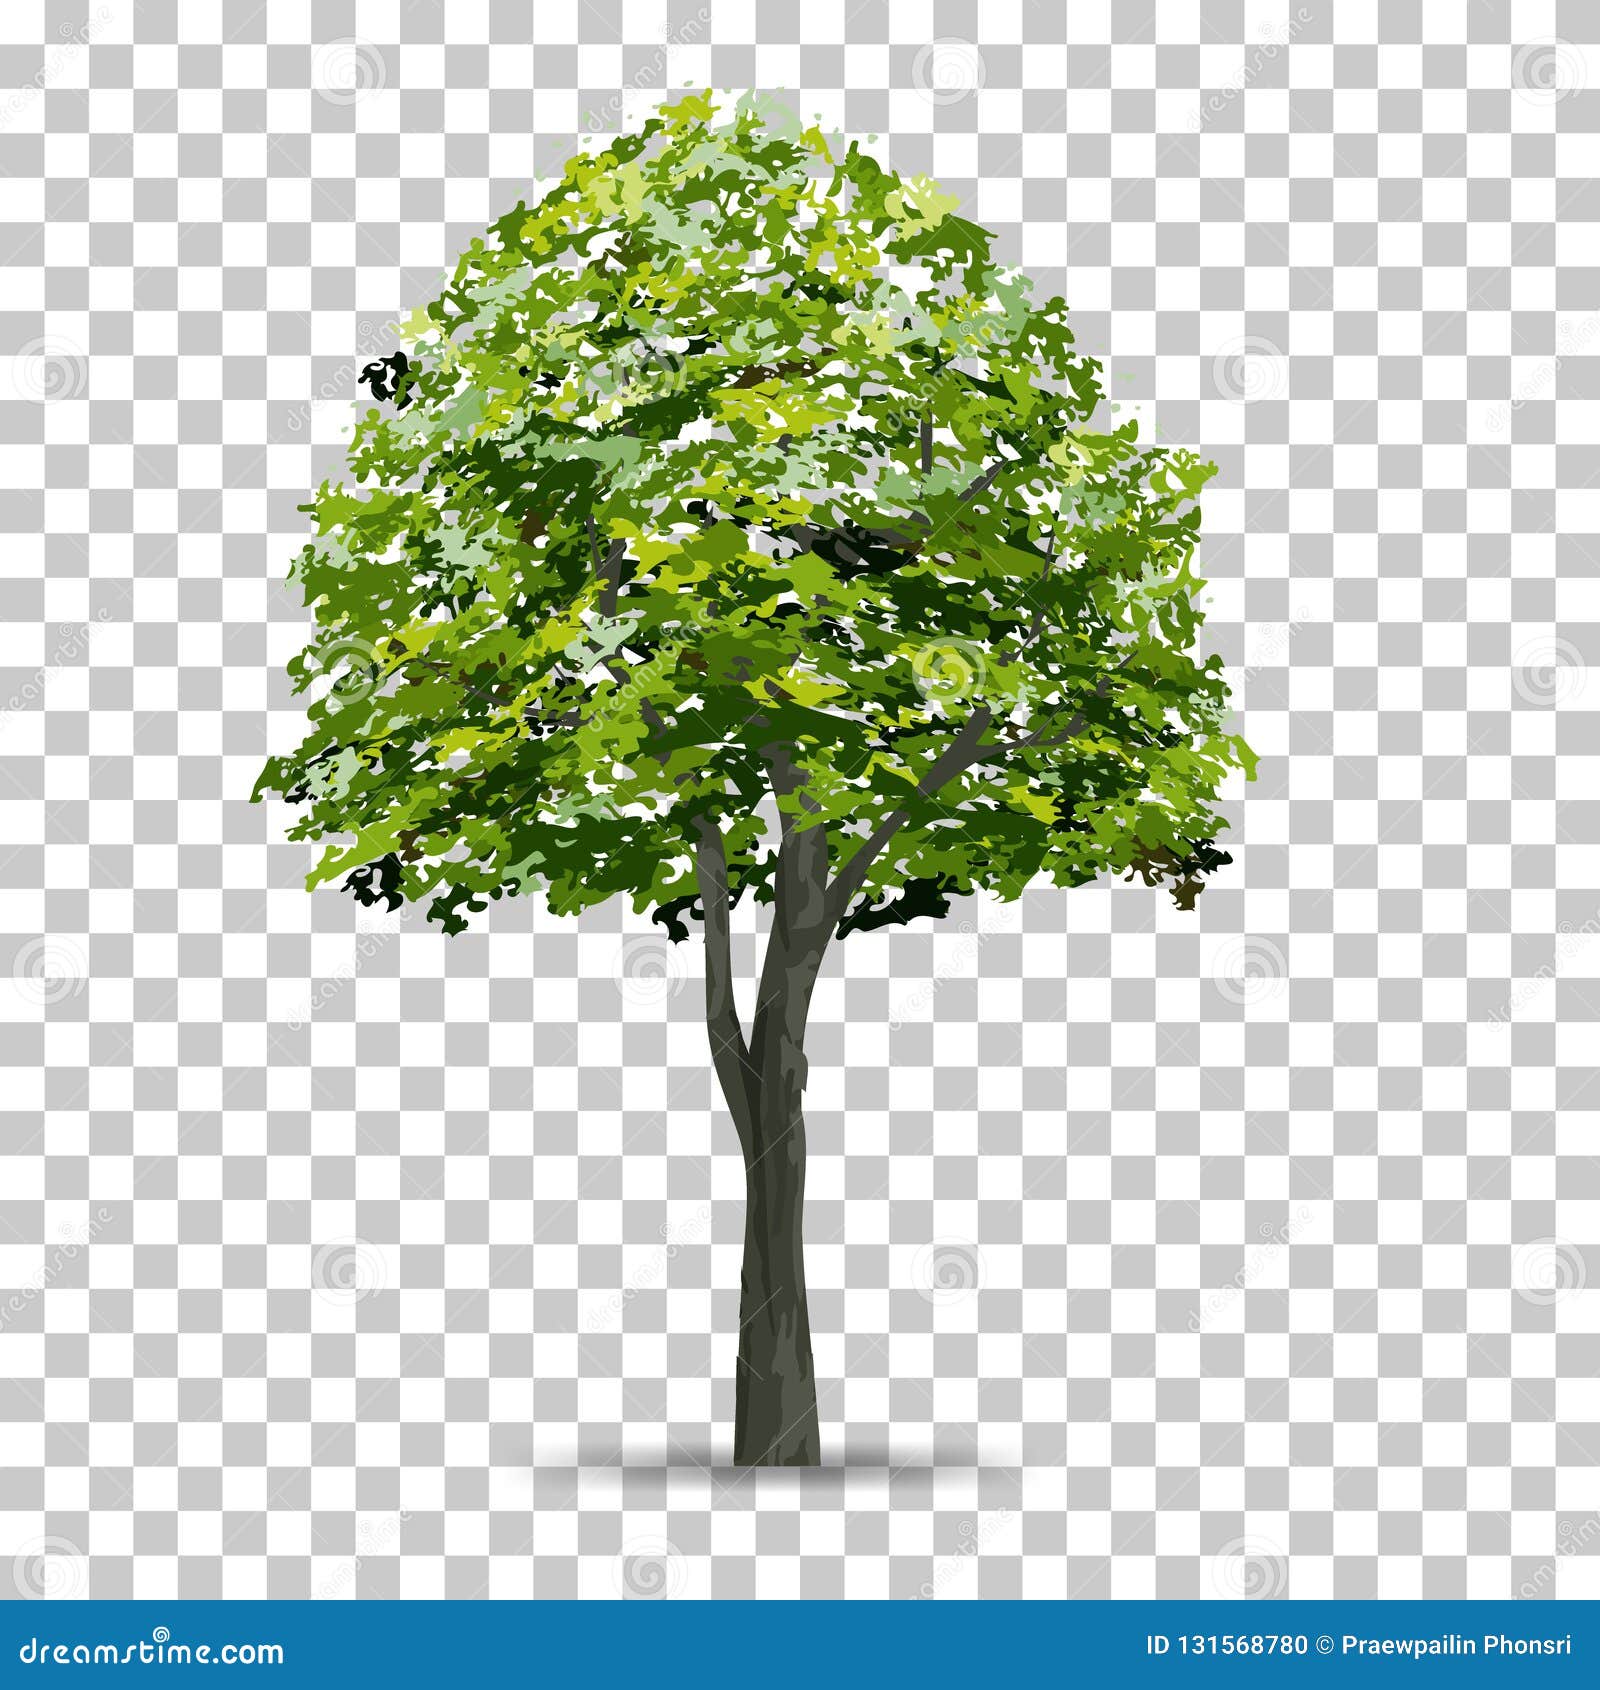 Featured image of post Tree Picture Without Background : You will also get a 15 png file with transparent background containing all images at once.